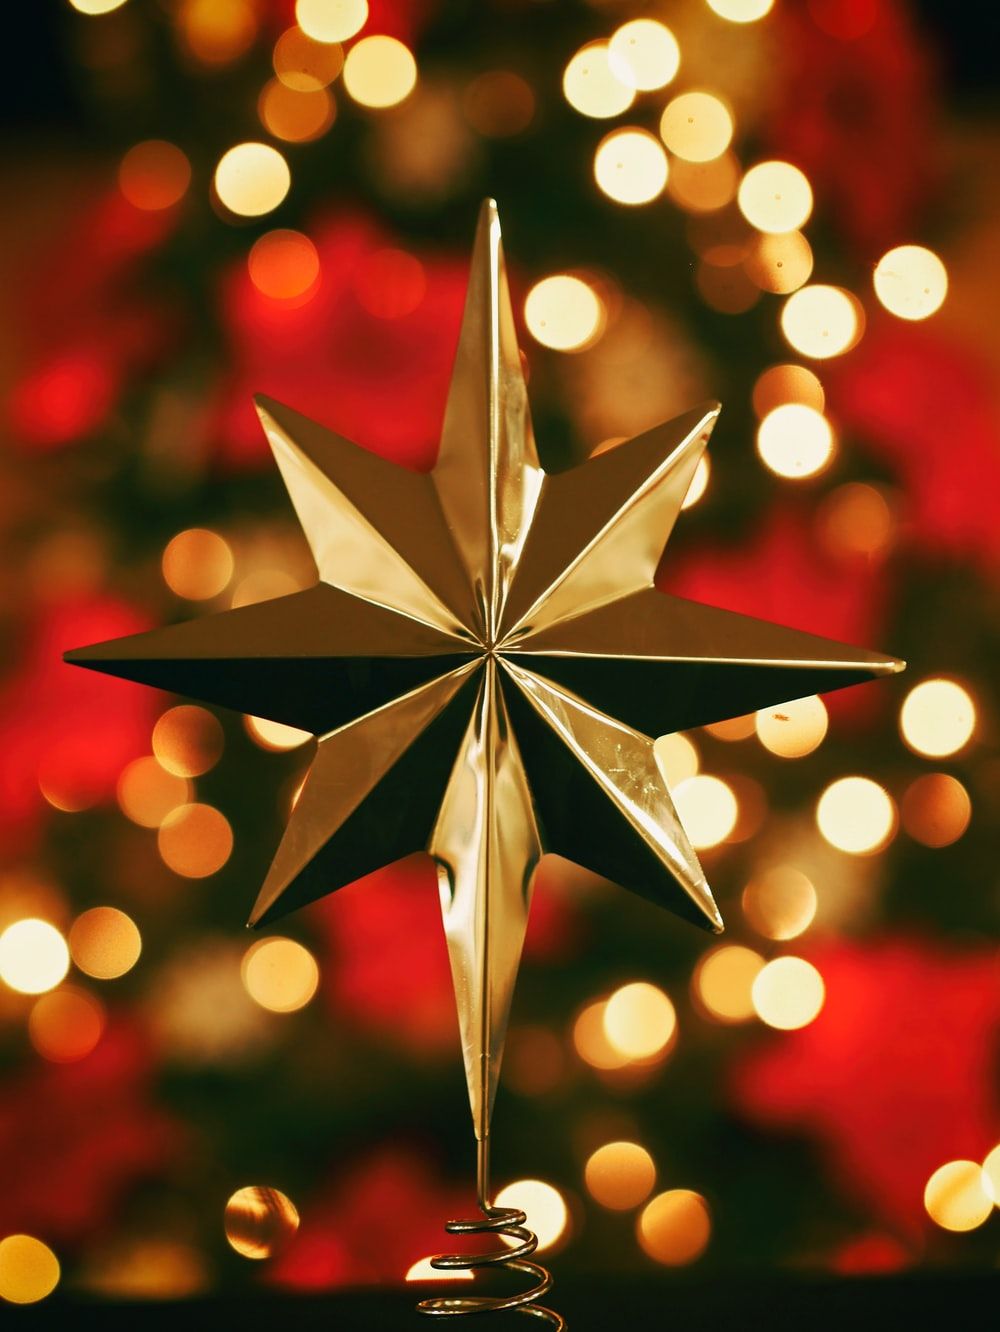 Gold Star Picture. Download Free Image